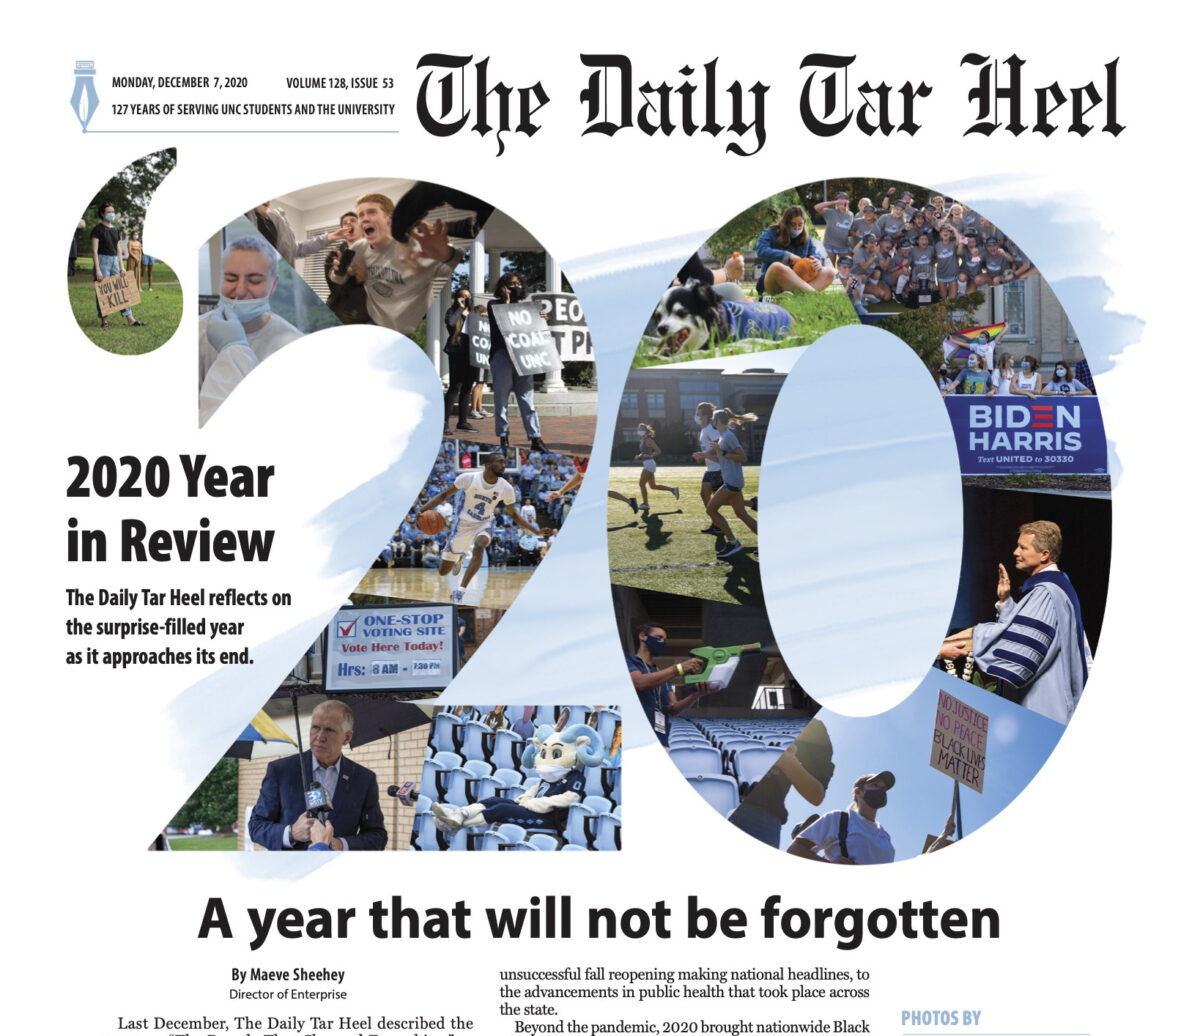 Daily Tar Heel Cuts Print to One Day a Week